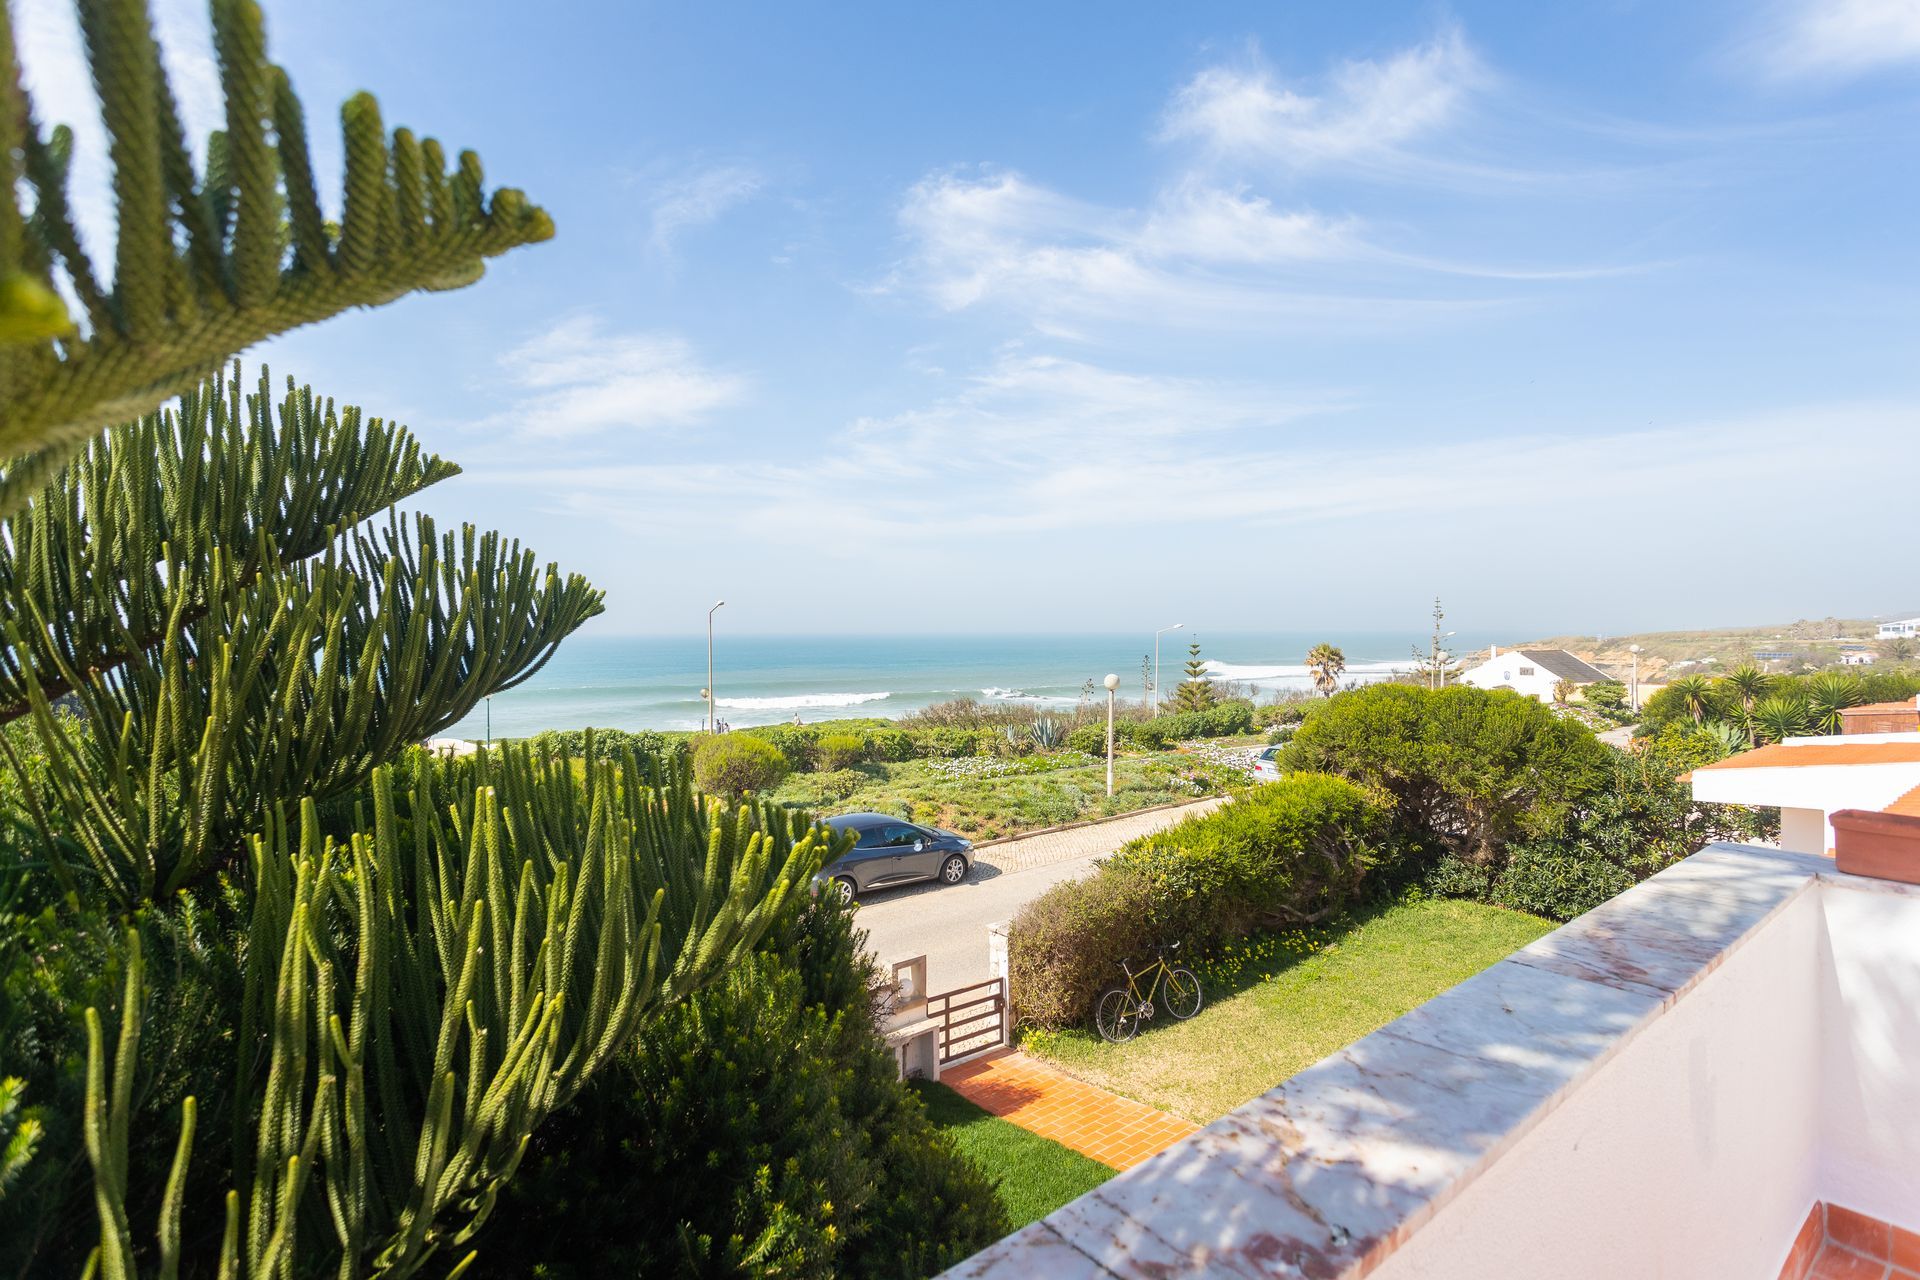 a view of the ocean from a balcony with trees in the foreground